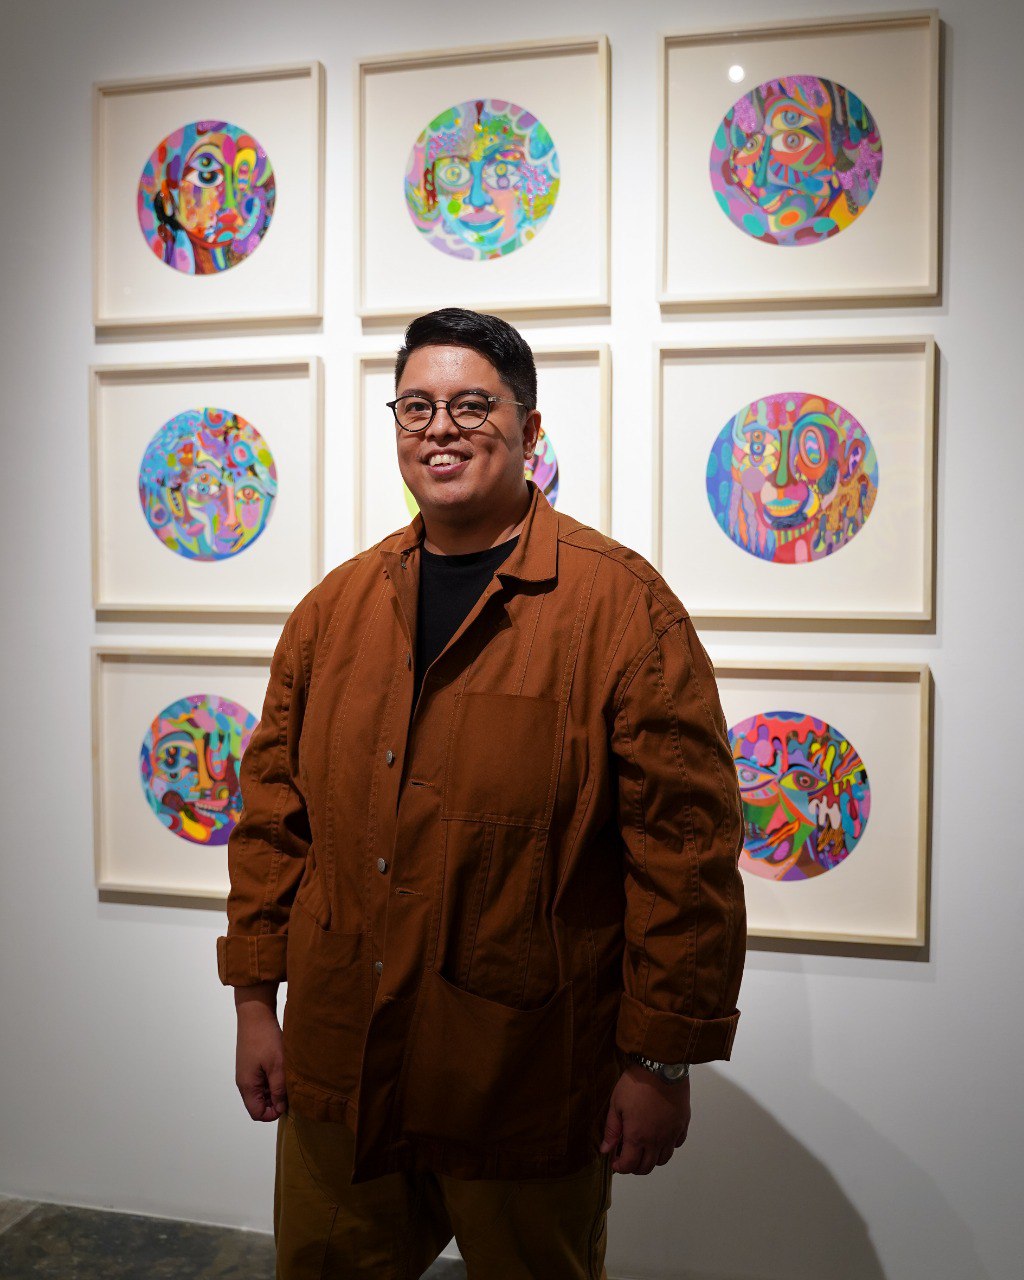 Patrick De Veyra with his series Flowing Water Never Gets Dirty (1-10). Photo by Art Cube